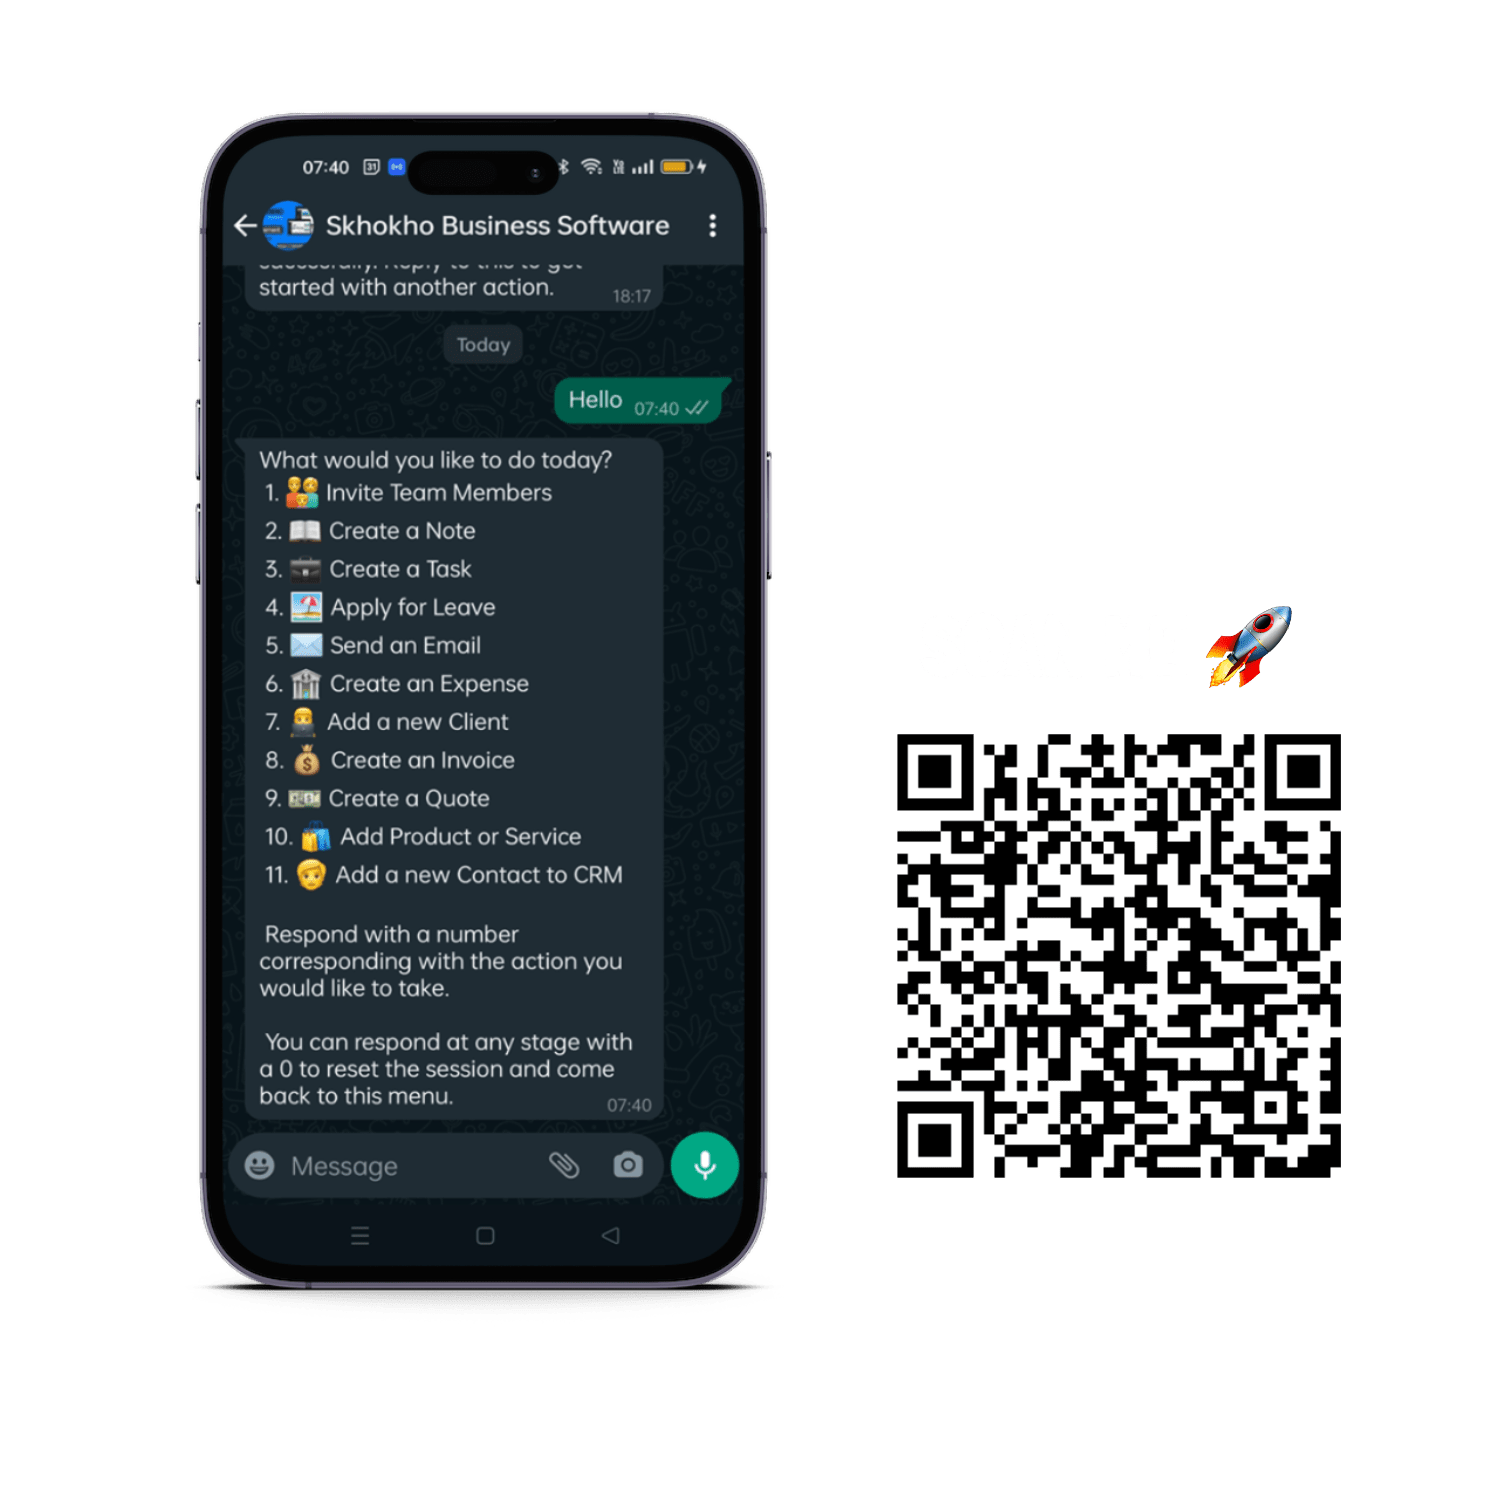 Mobile Business Management Software on WhatsApp